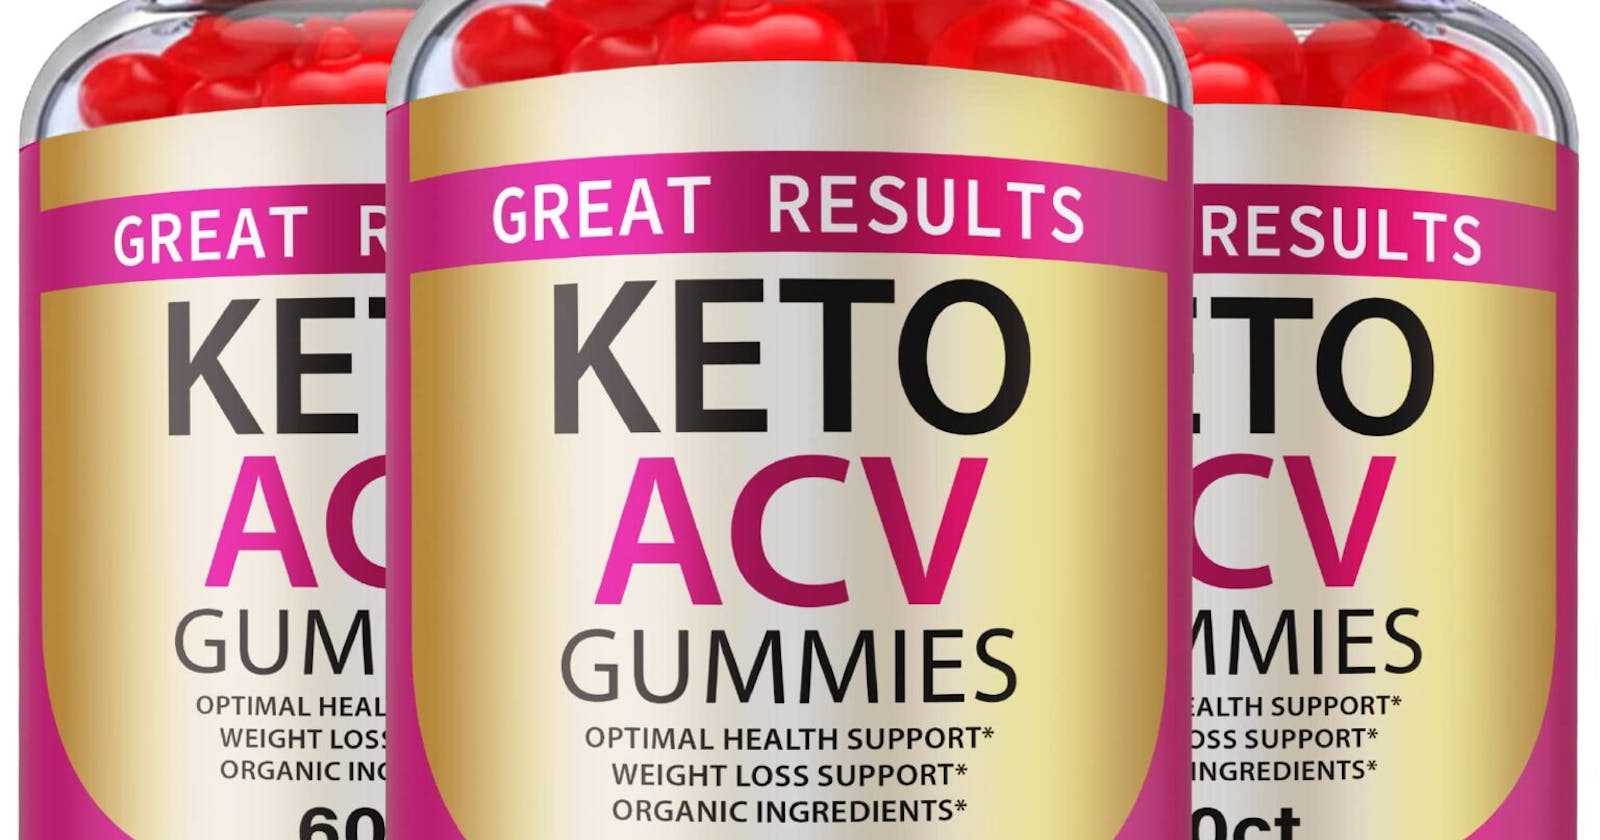 Great Results Keto ACV Gummies- Helps Accelerate Fat Burn & Transform Your Body!